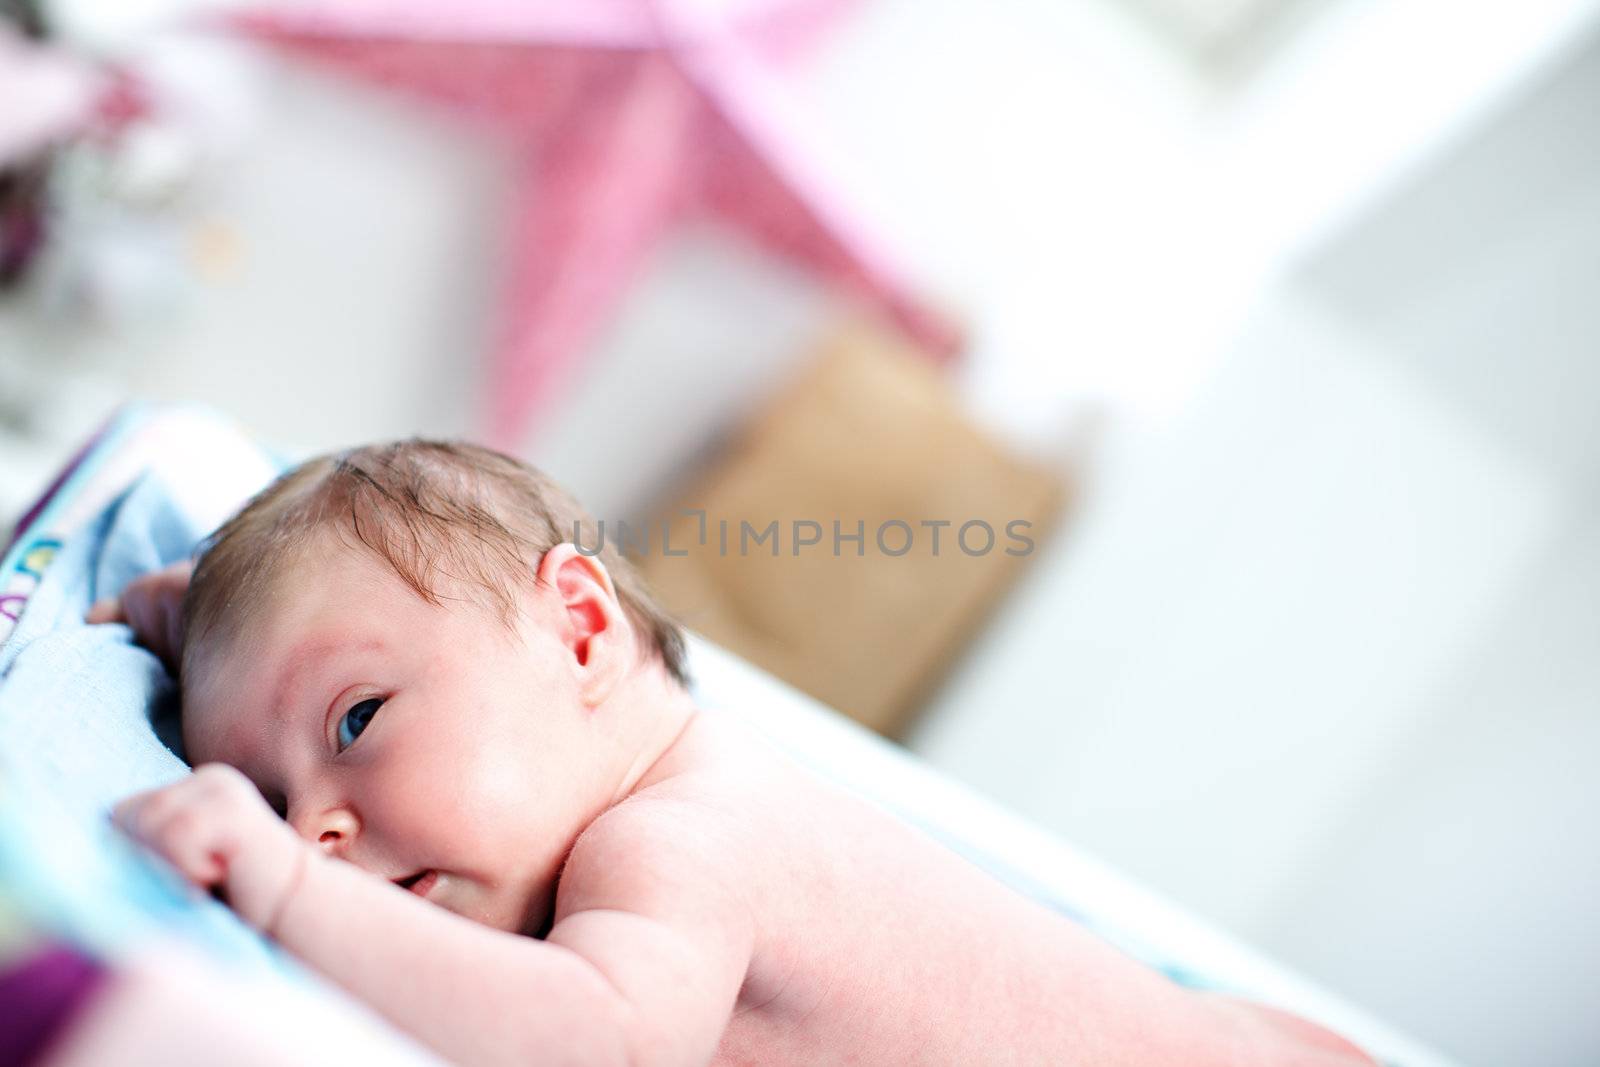 Cute inquisitive newborn baby lying on its stomach on a blanket keeping a watchful eye on its surroundings with copyspace